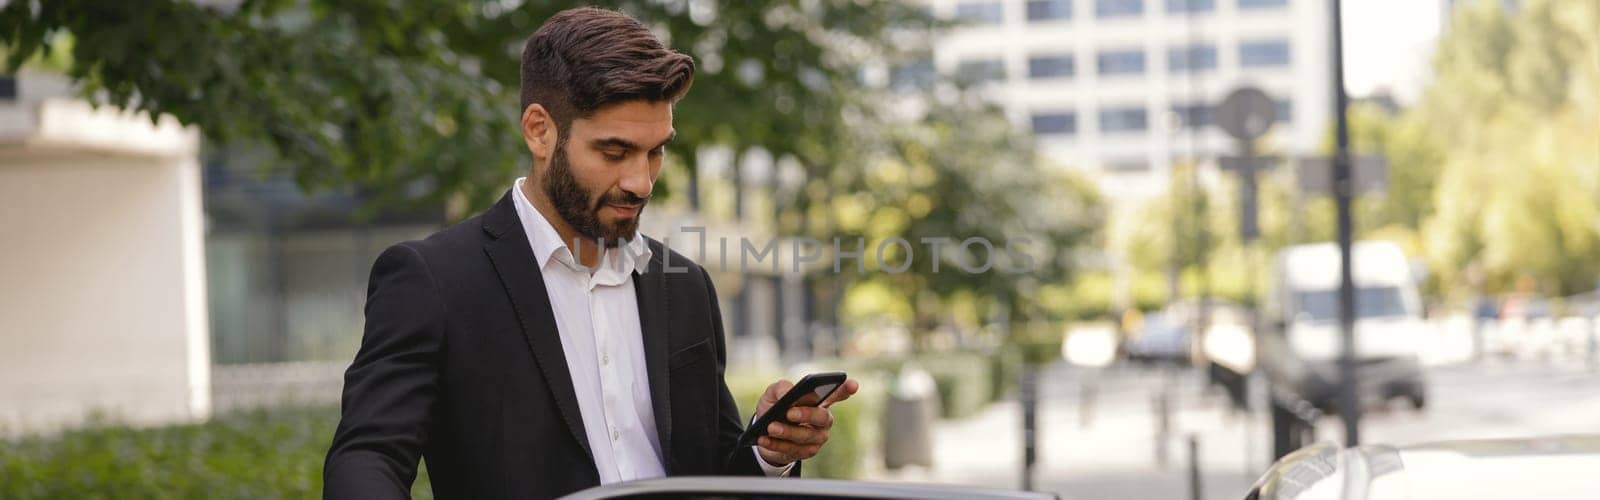 Handsome businessman standing near car with mobile phone before sit inside by Yaroslav_astakhov